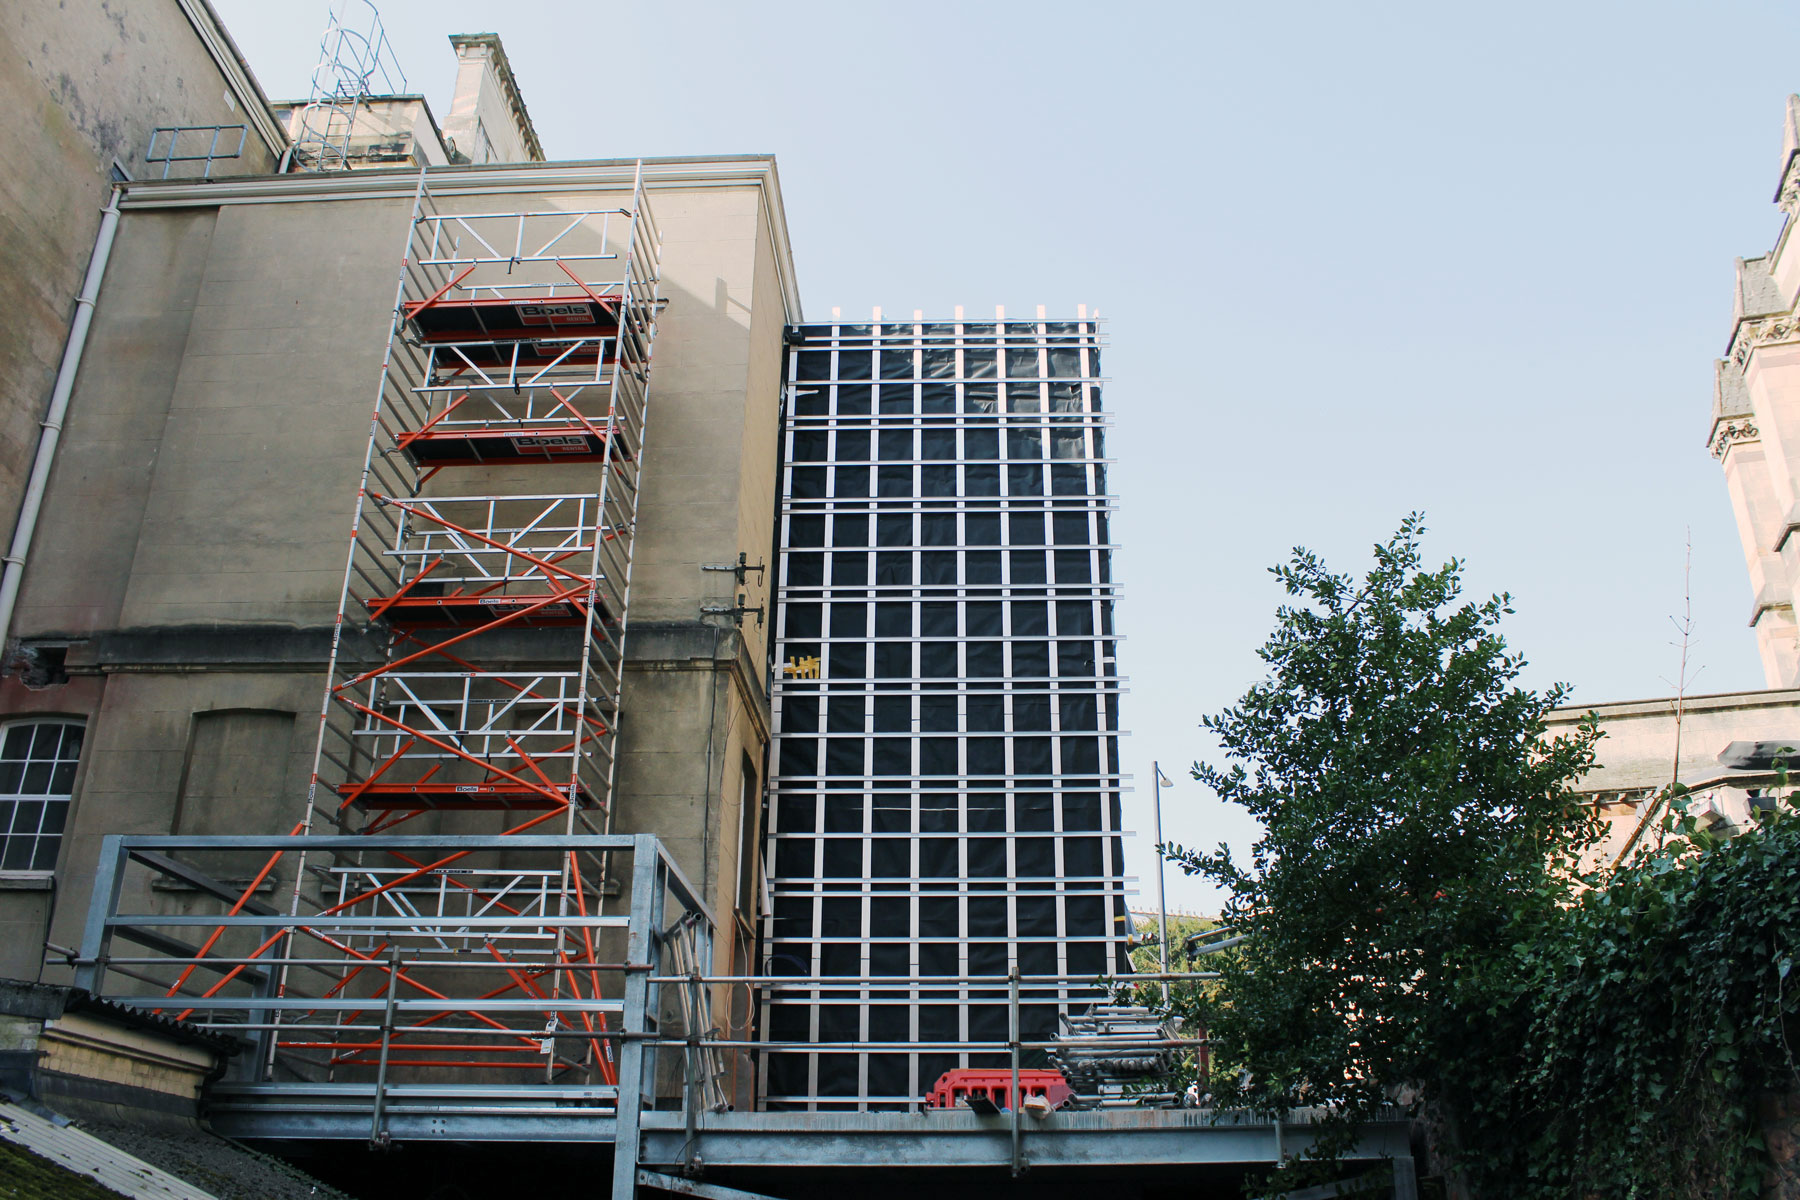 External view of the RWA building showing the shell of the new lift 